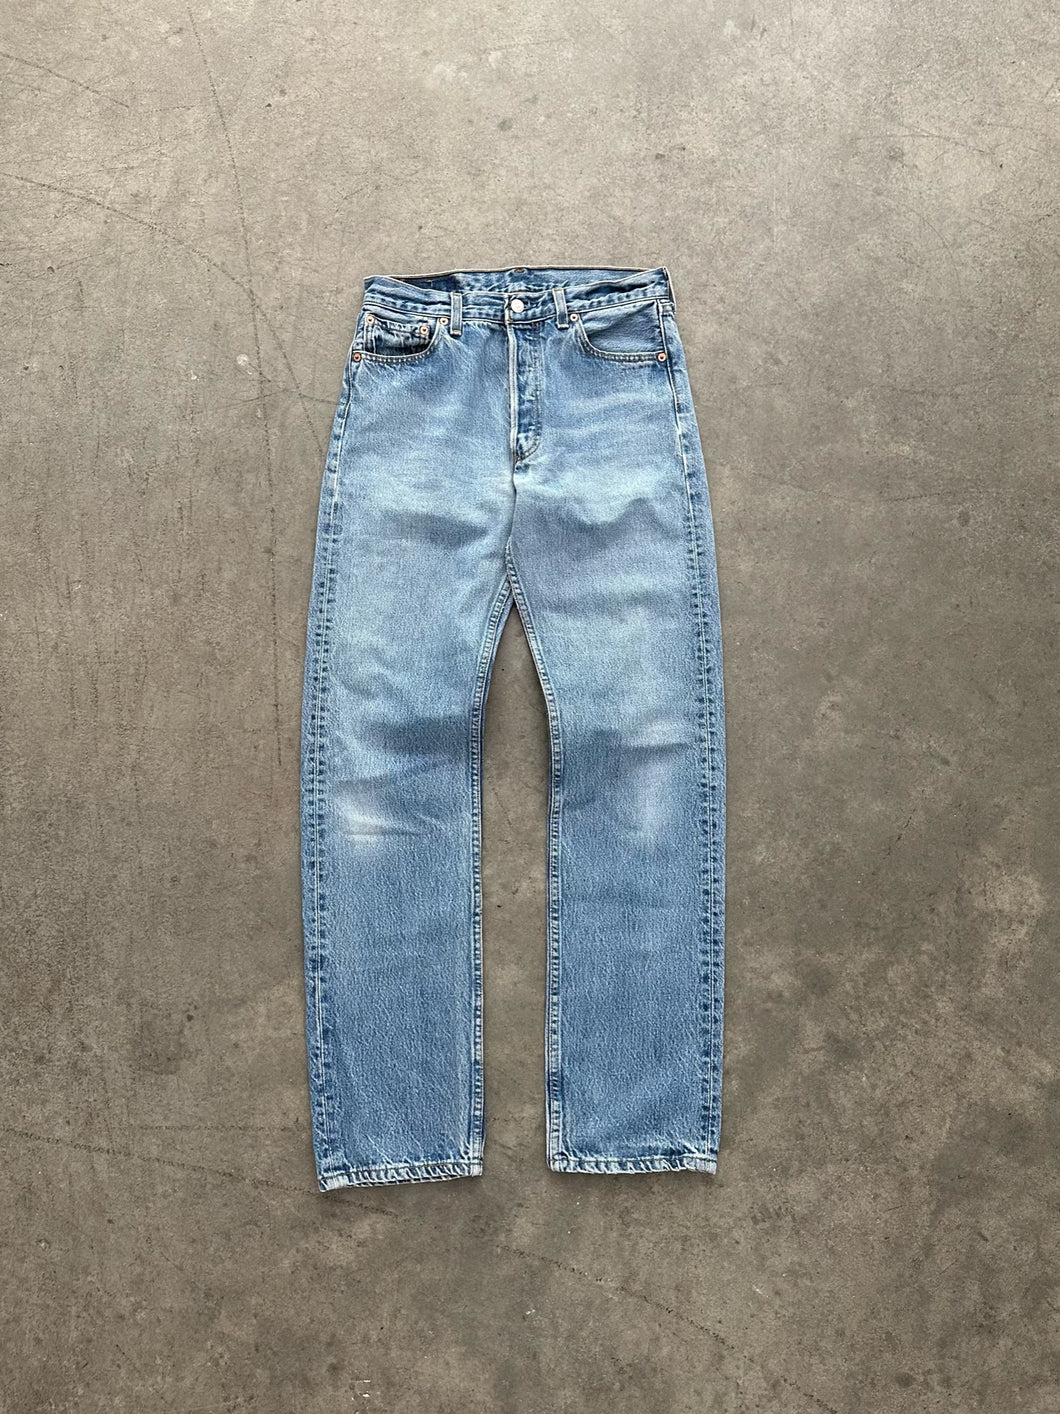 LEVI’S 501 FADED BLUE JEANS - 1980S